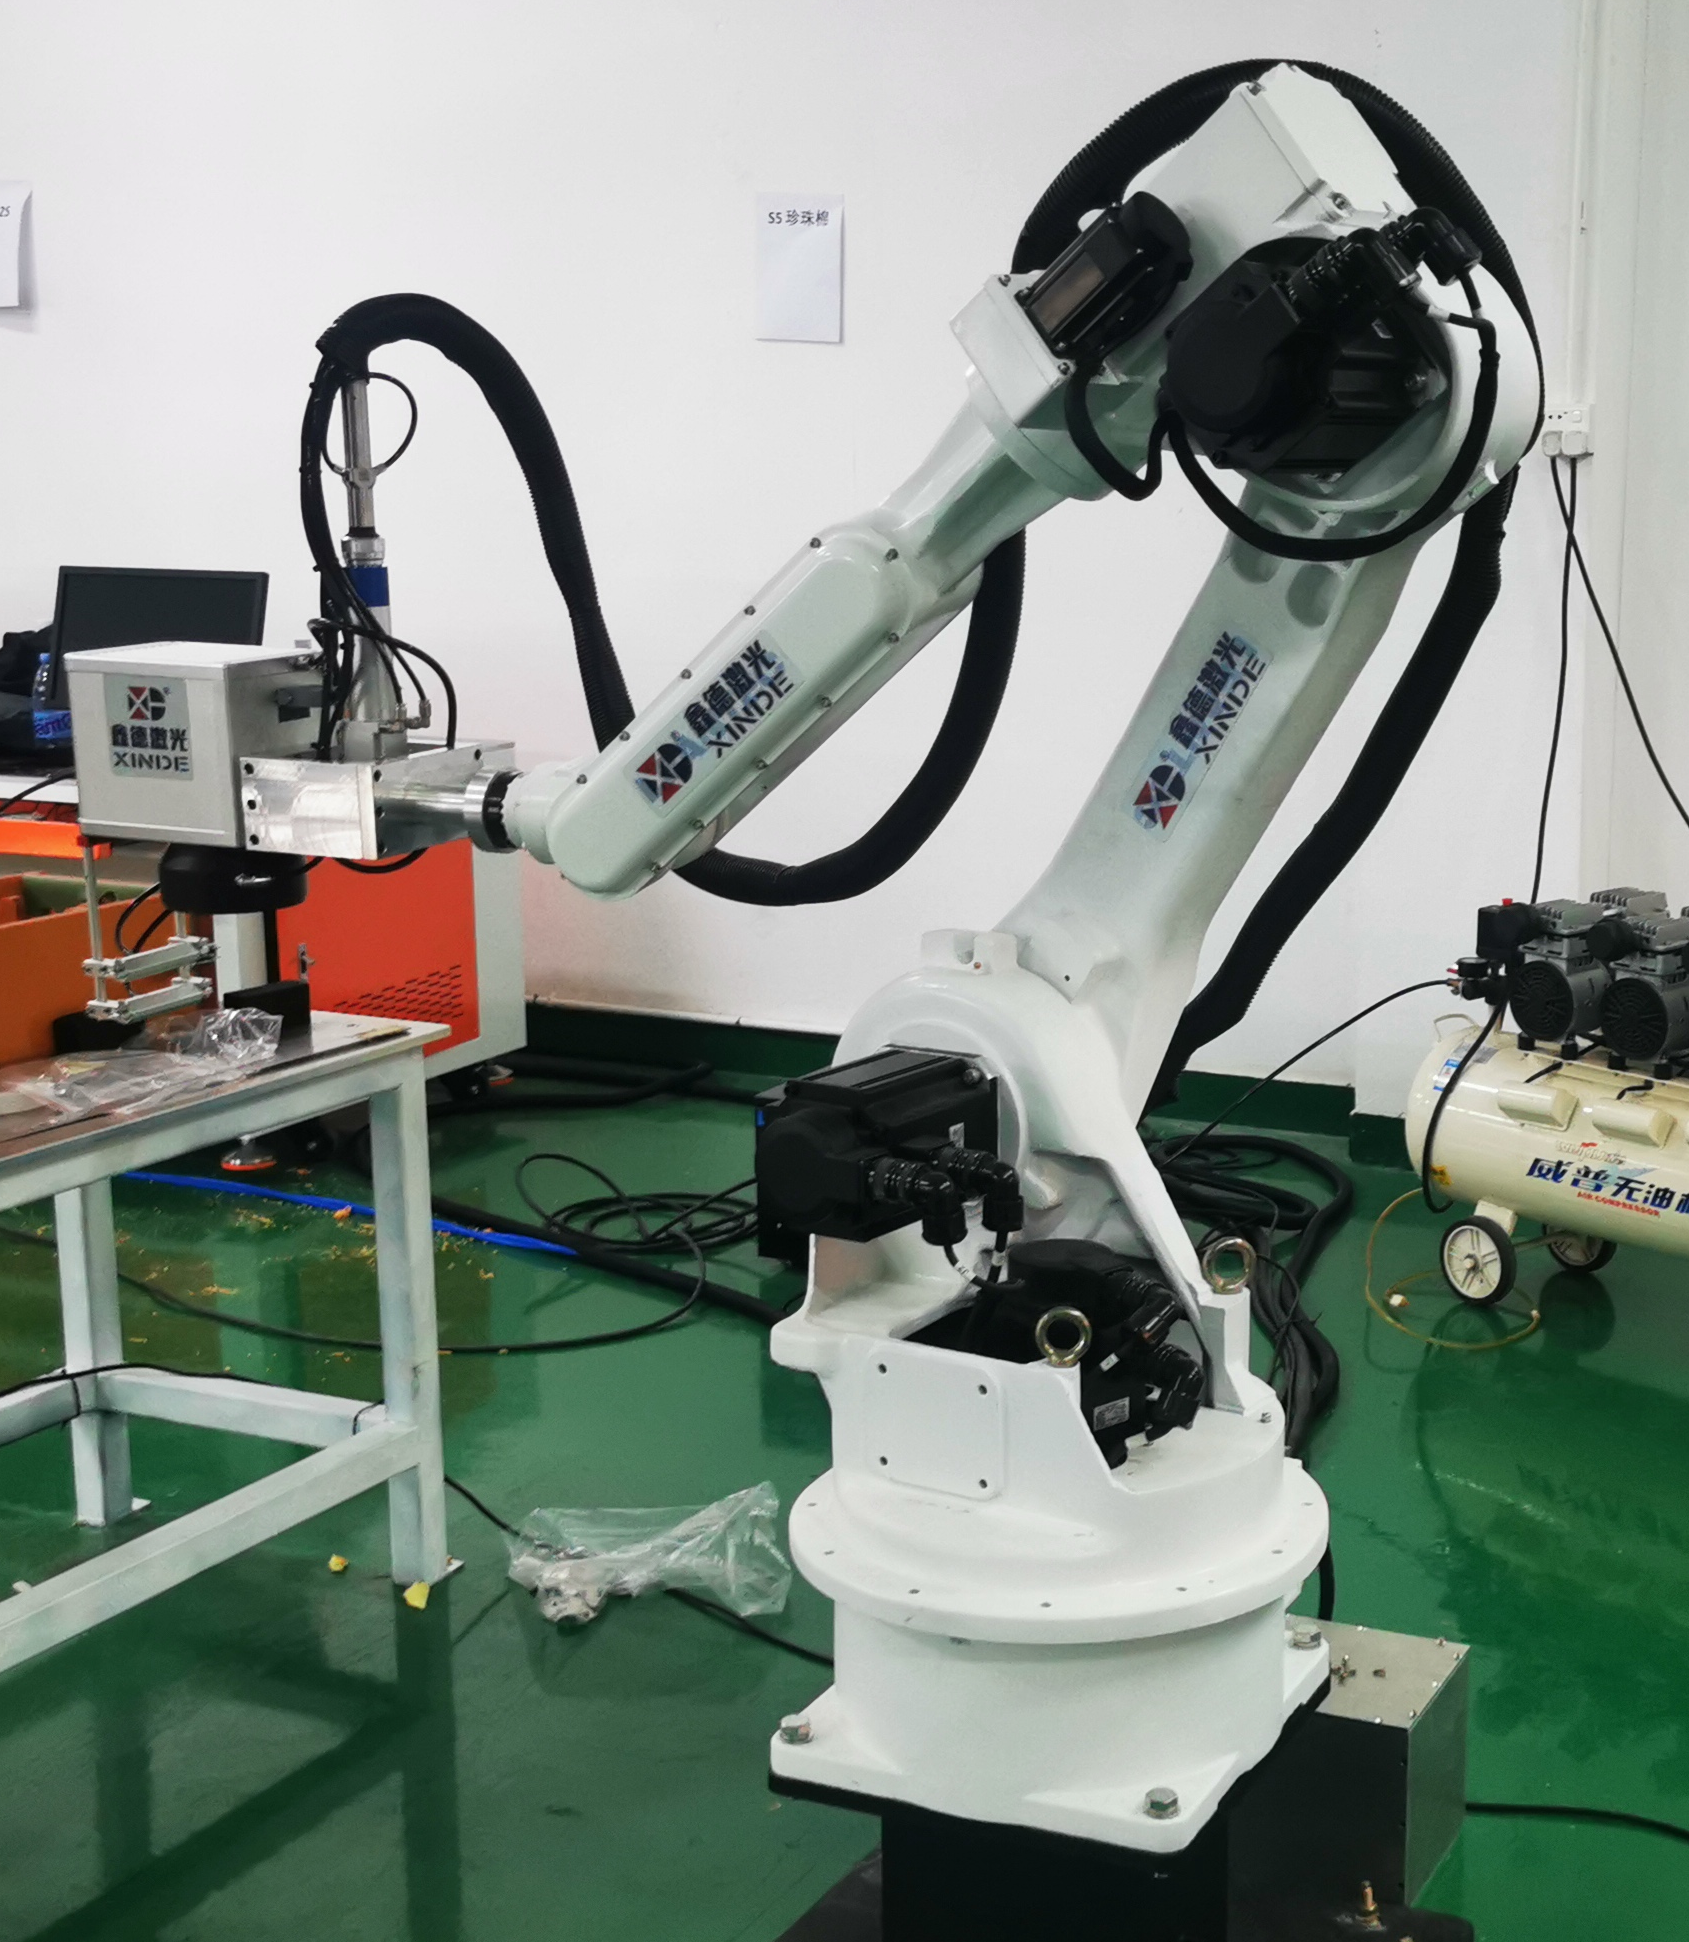 Welding manipulator will lead the future of welding automation